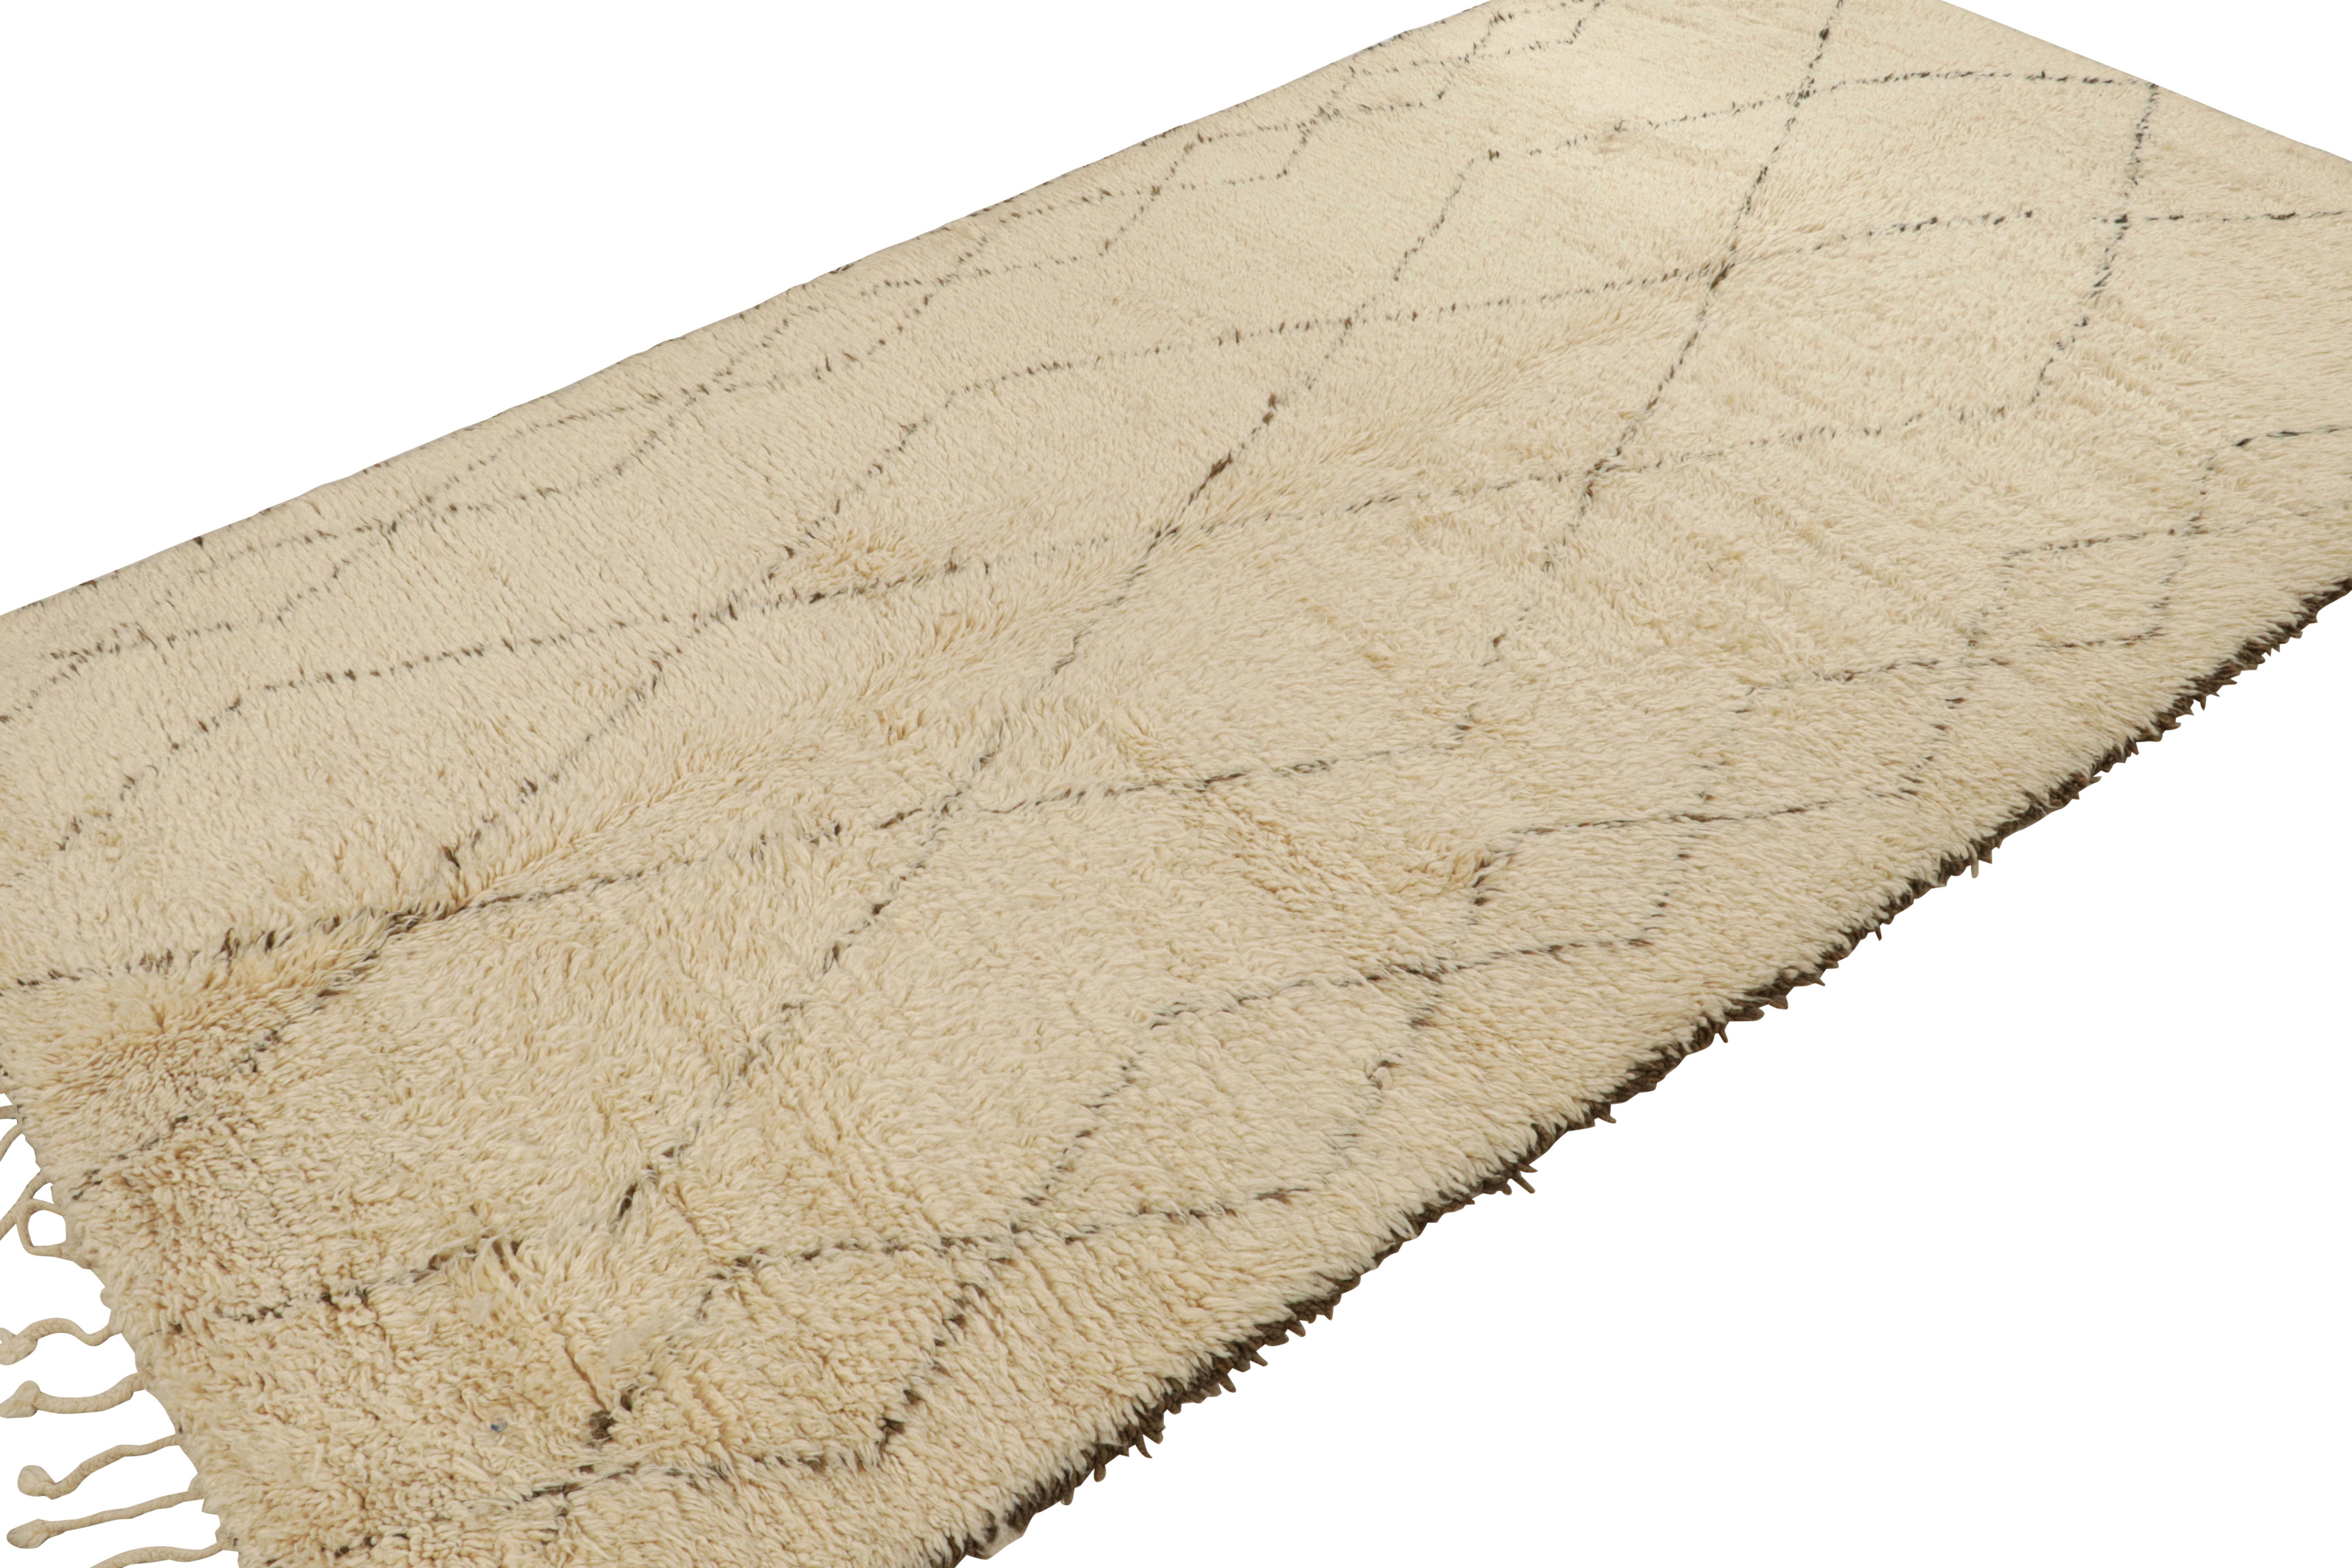 Hand-knotted in wool circa 1950-1960, this 6x11 vintage Moroccan rug is similar to Beni Ourain rugs in its minimalist sensibility. 

On the Design: 

Connoisseurs may admire the subtle appeal of this antique rug that comes from a Berber geometric